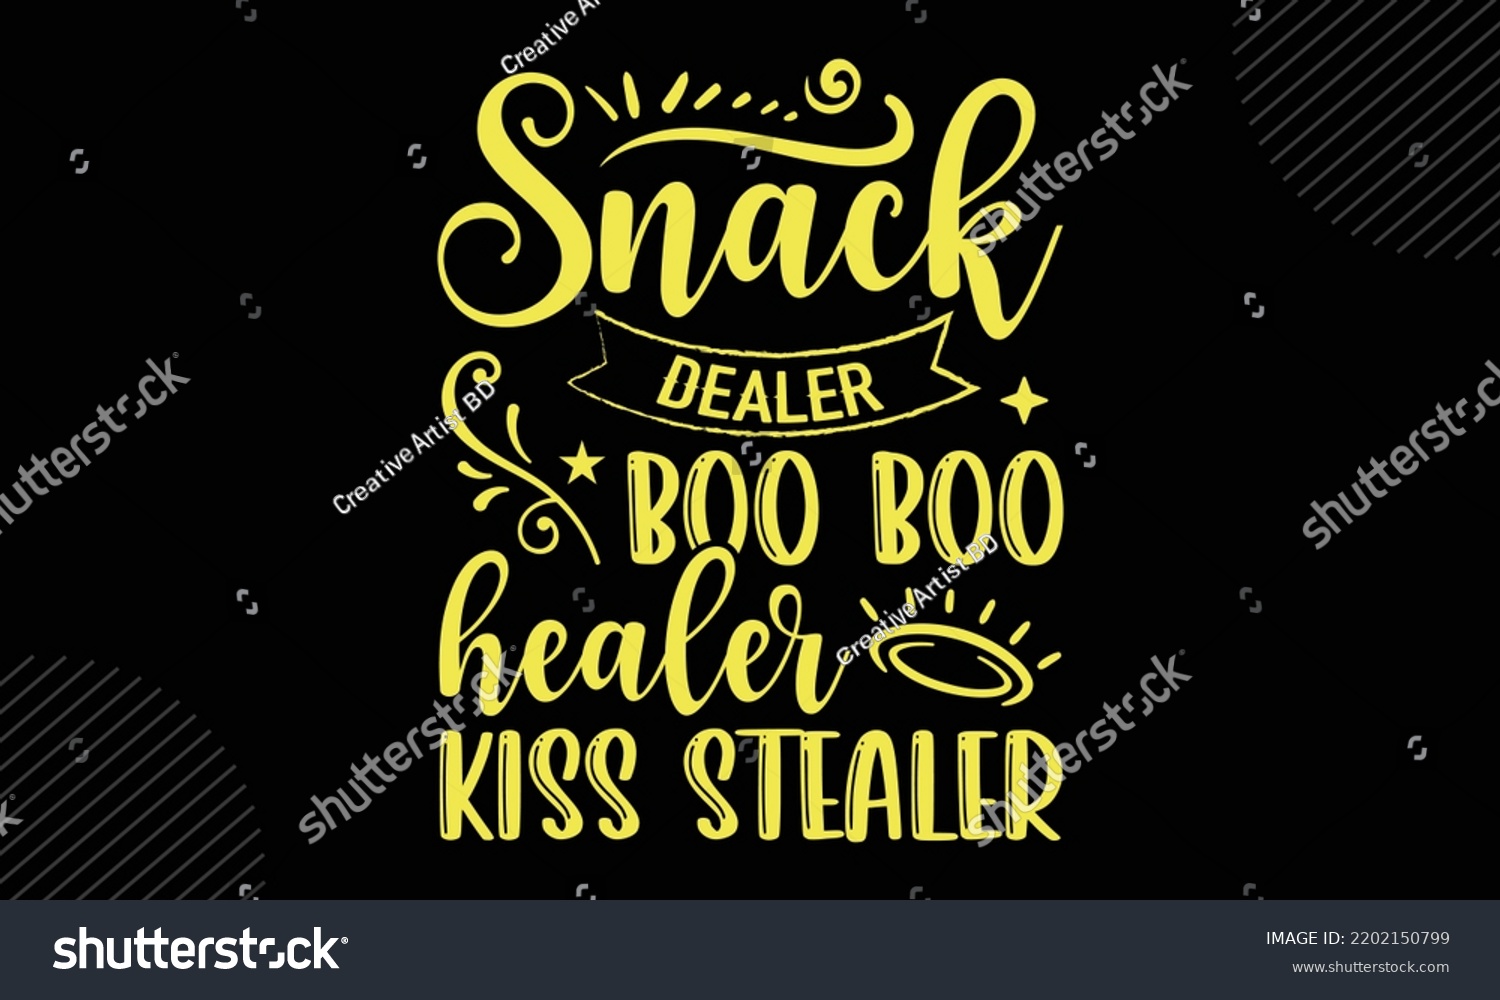 SVG of Snack Dealer Boo Boo Healer Kiss Stealer - Mom T shirt Design, Hand drawn lettering and calligraphy, Svg Files for Cricut, Instant Download, Illustration for prints on bags, posters svg